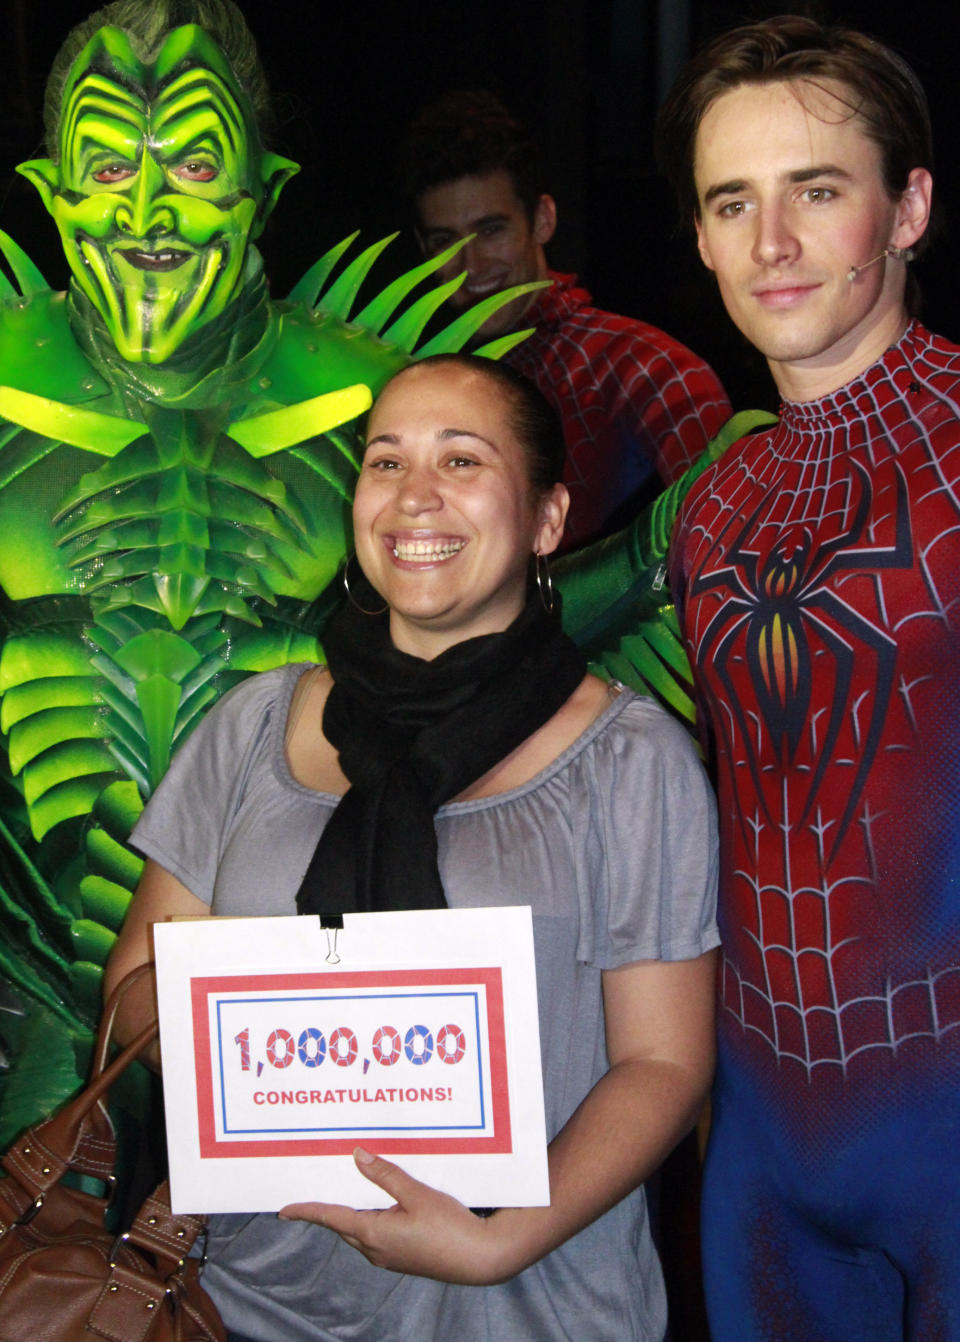 Yvelisse Fermin, from the New York City borough of Queens, poses with "Spider-Man Turn of the Dark" stars Patrick Page, left, as the Green Goblin, and Reeve Carney, as Spiderman, after she is awarded a city tour package as the one millionth viewer of the production on Wednesday, May 16, 2012, in New York. (AP Photo/Bebeto Matthews)